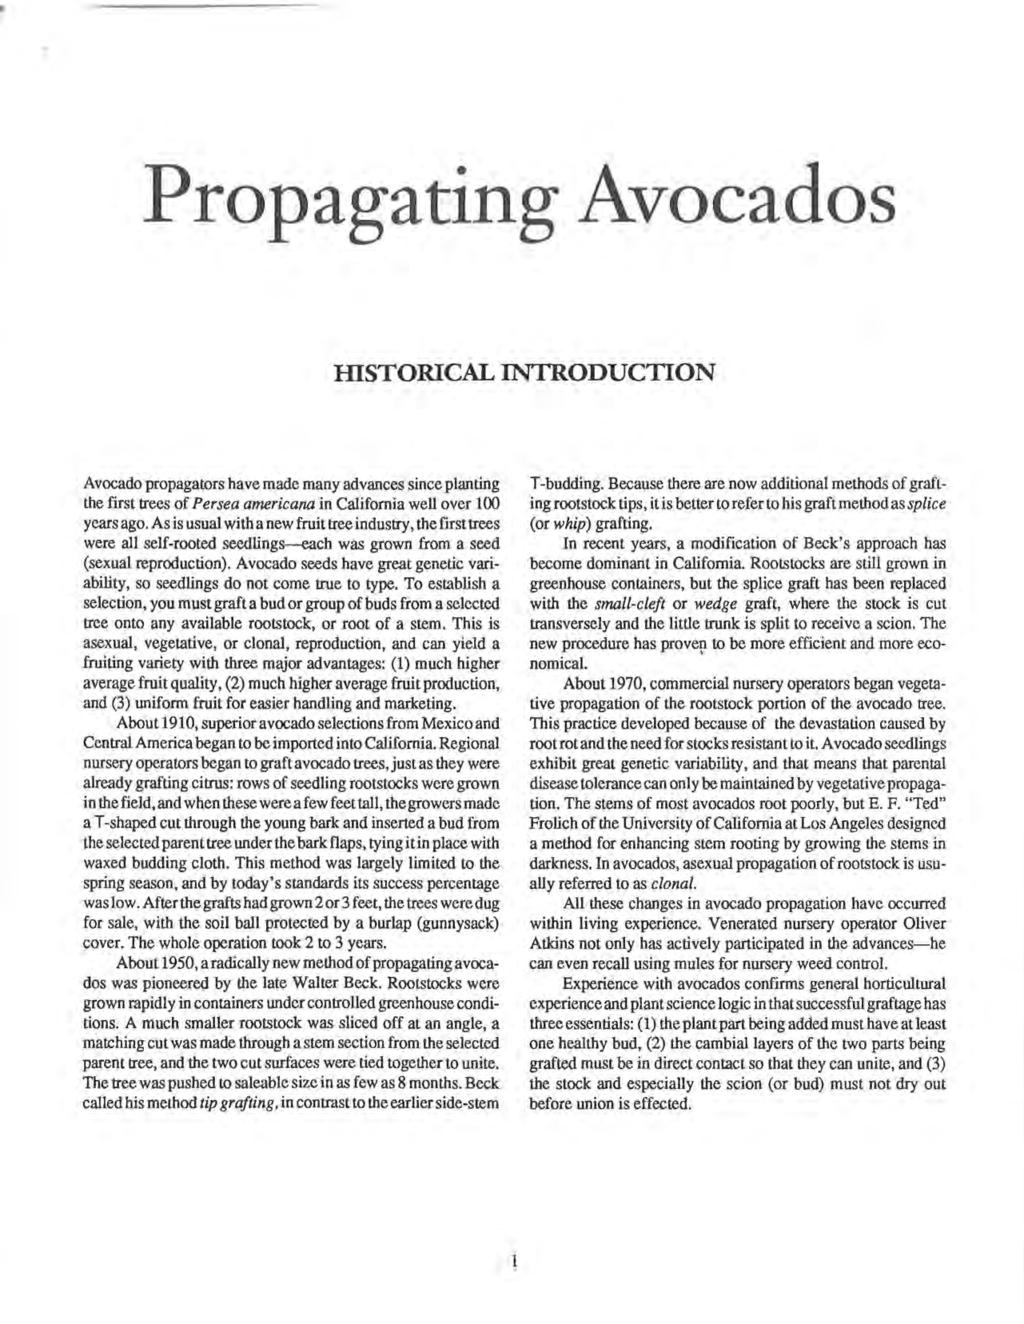 Propagating Avocados mstorical INTRODUCTION Avocado propagators have made many advances since planting the first trees of Persea americana in California well over 100 years ago.